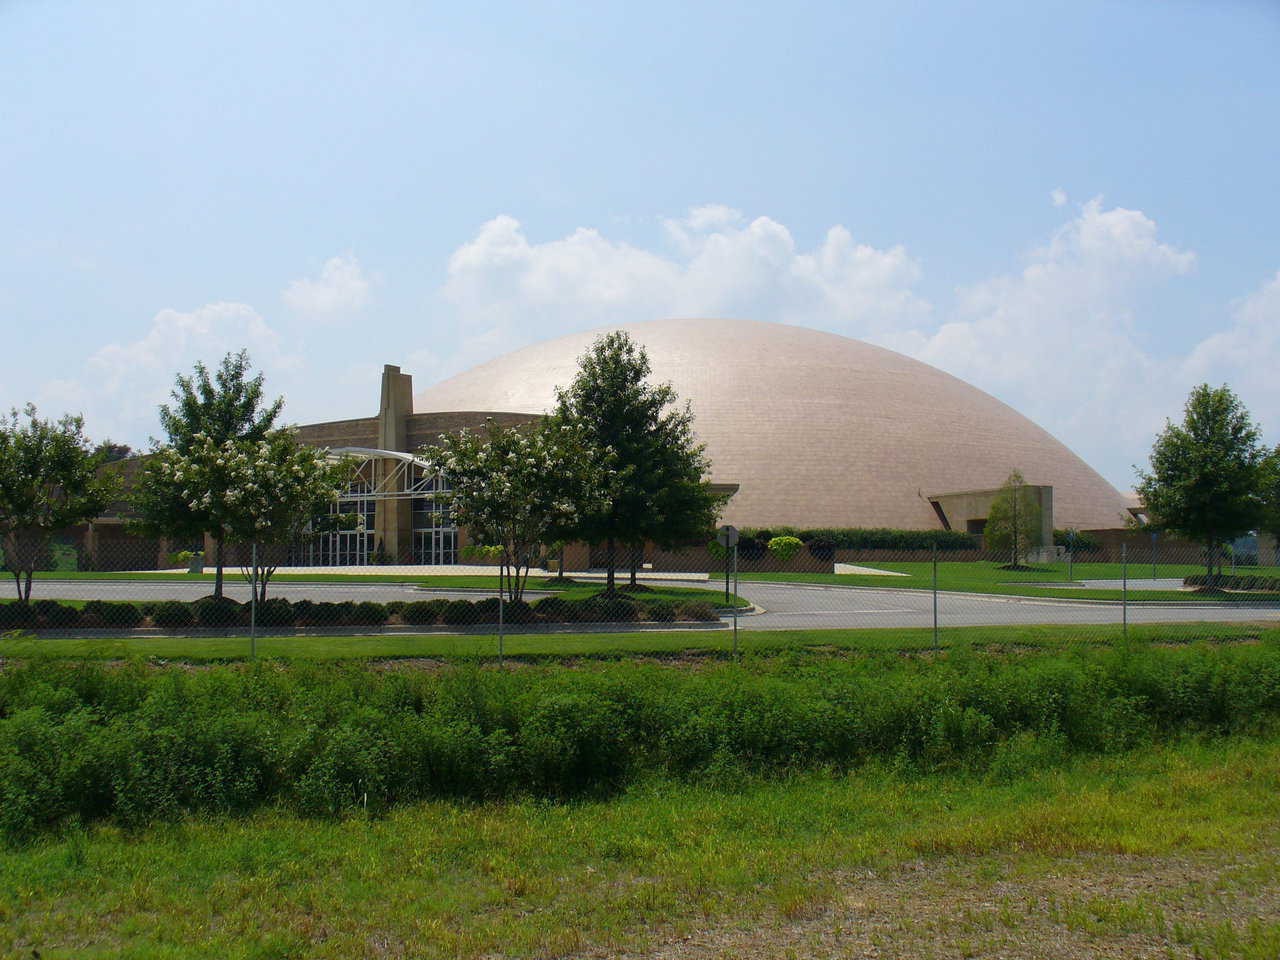 Faith Chapel Christian Center — Located in Birmingham, Alabama, this Monolithic Dome mega church was built in 2000. It is a 280ft diameter dome with 61,575sf (1.414 acre).